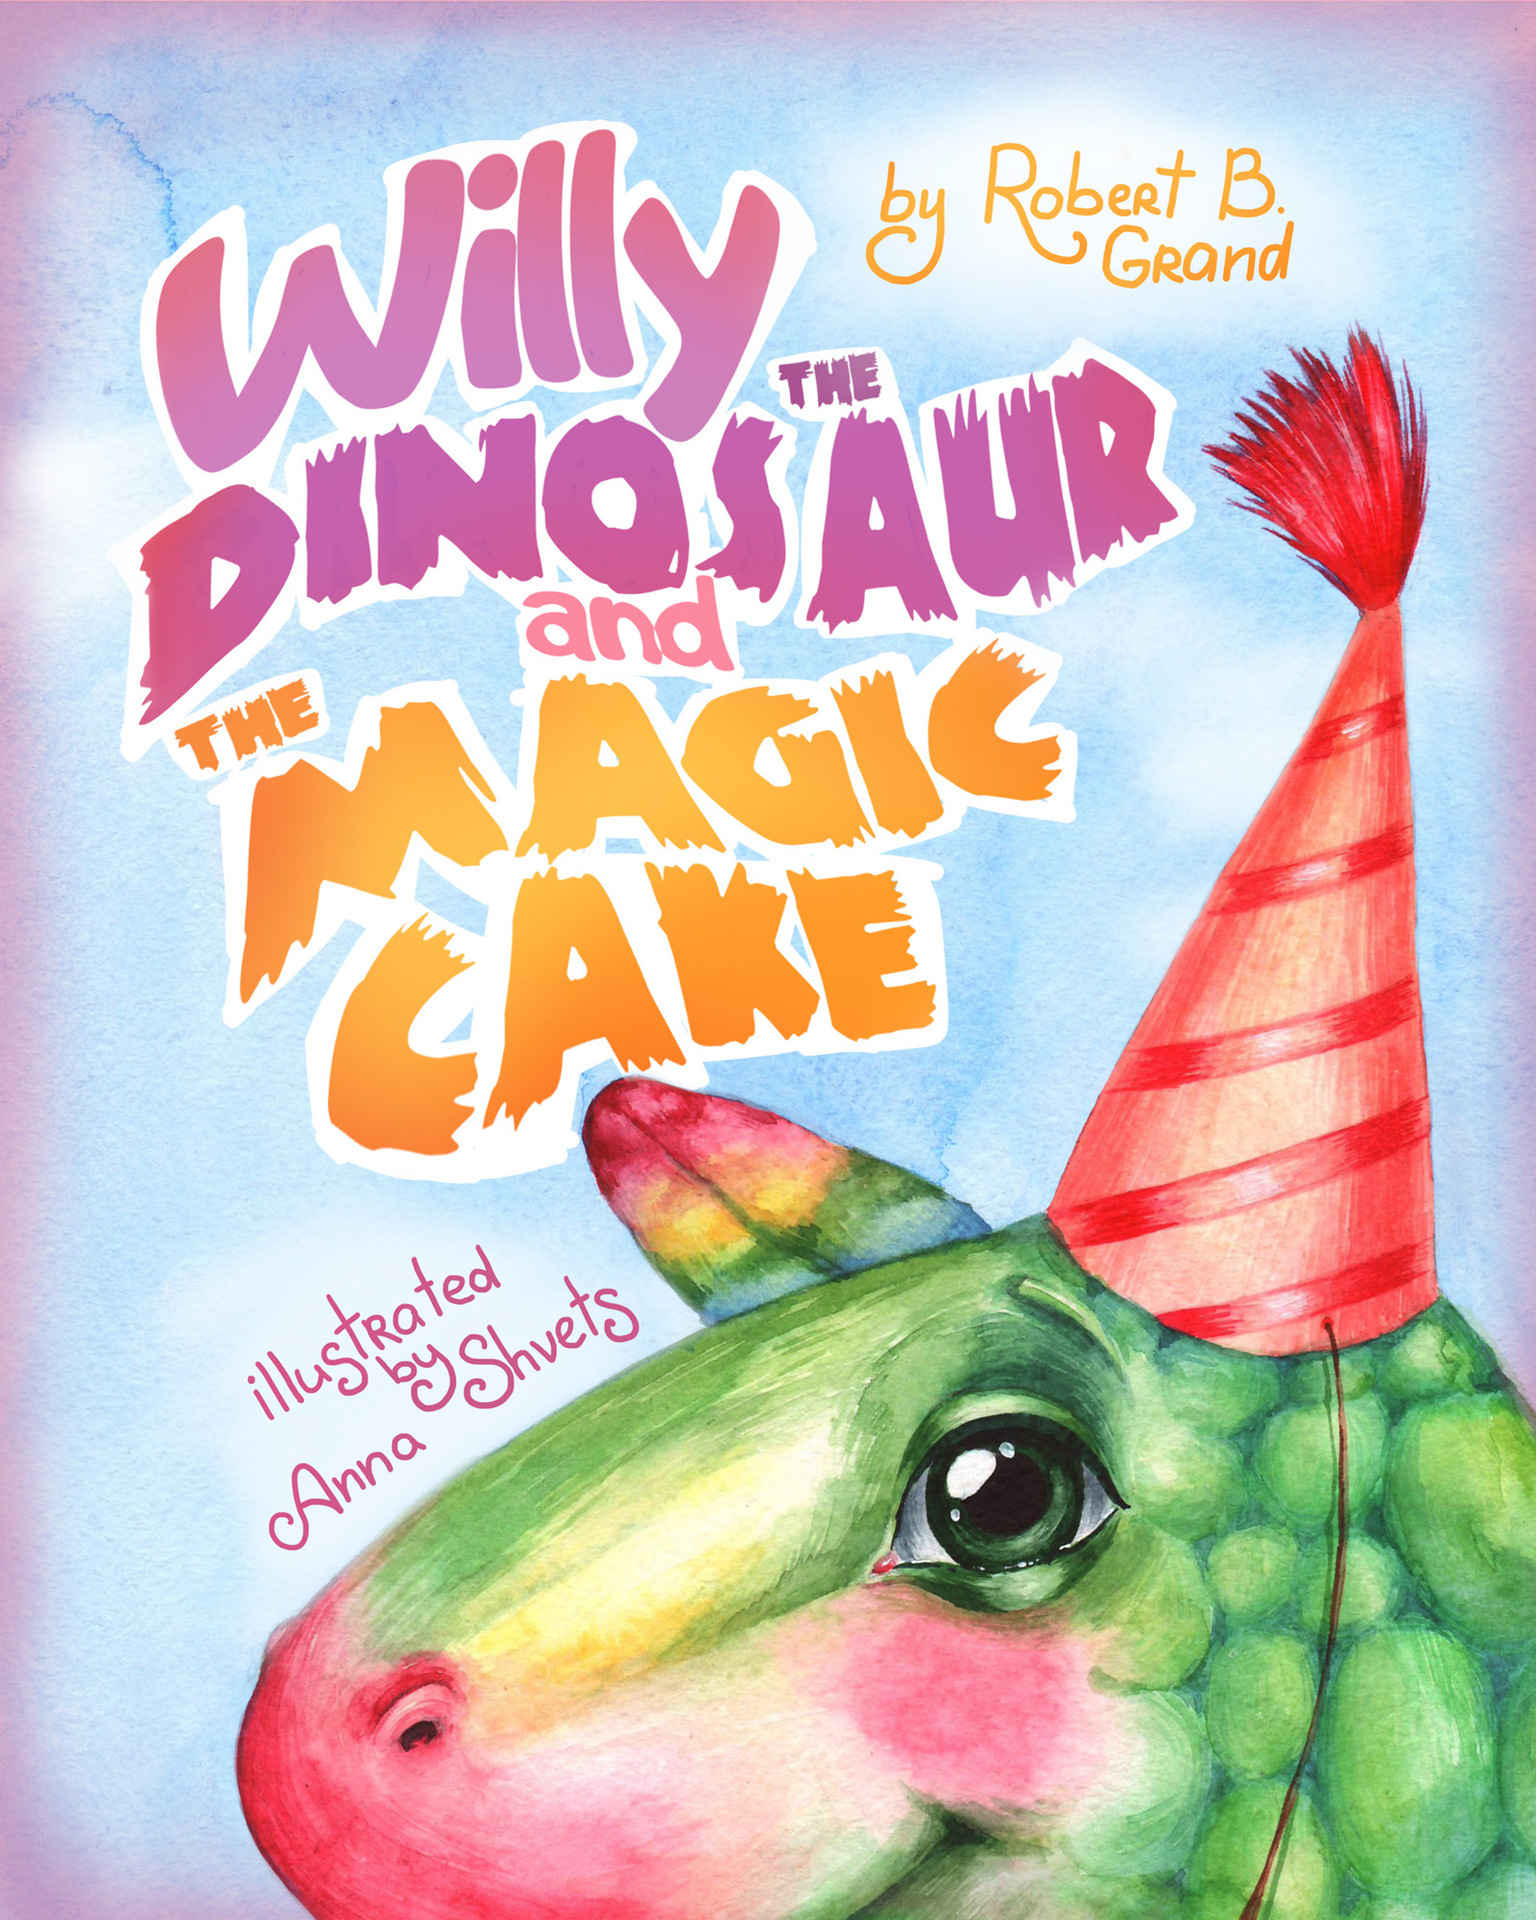 FREE: Willy the Dinosaur and the Magic Cake by Robert B. grand